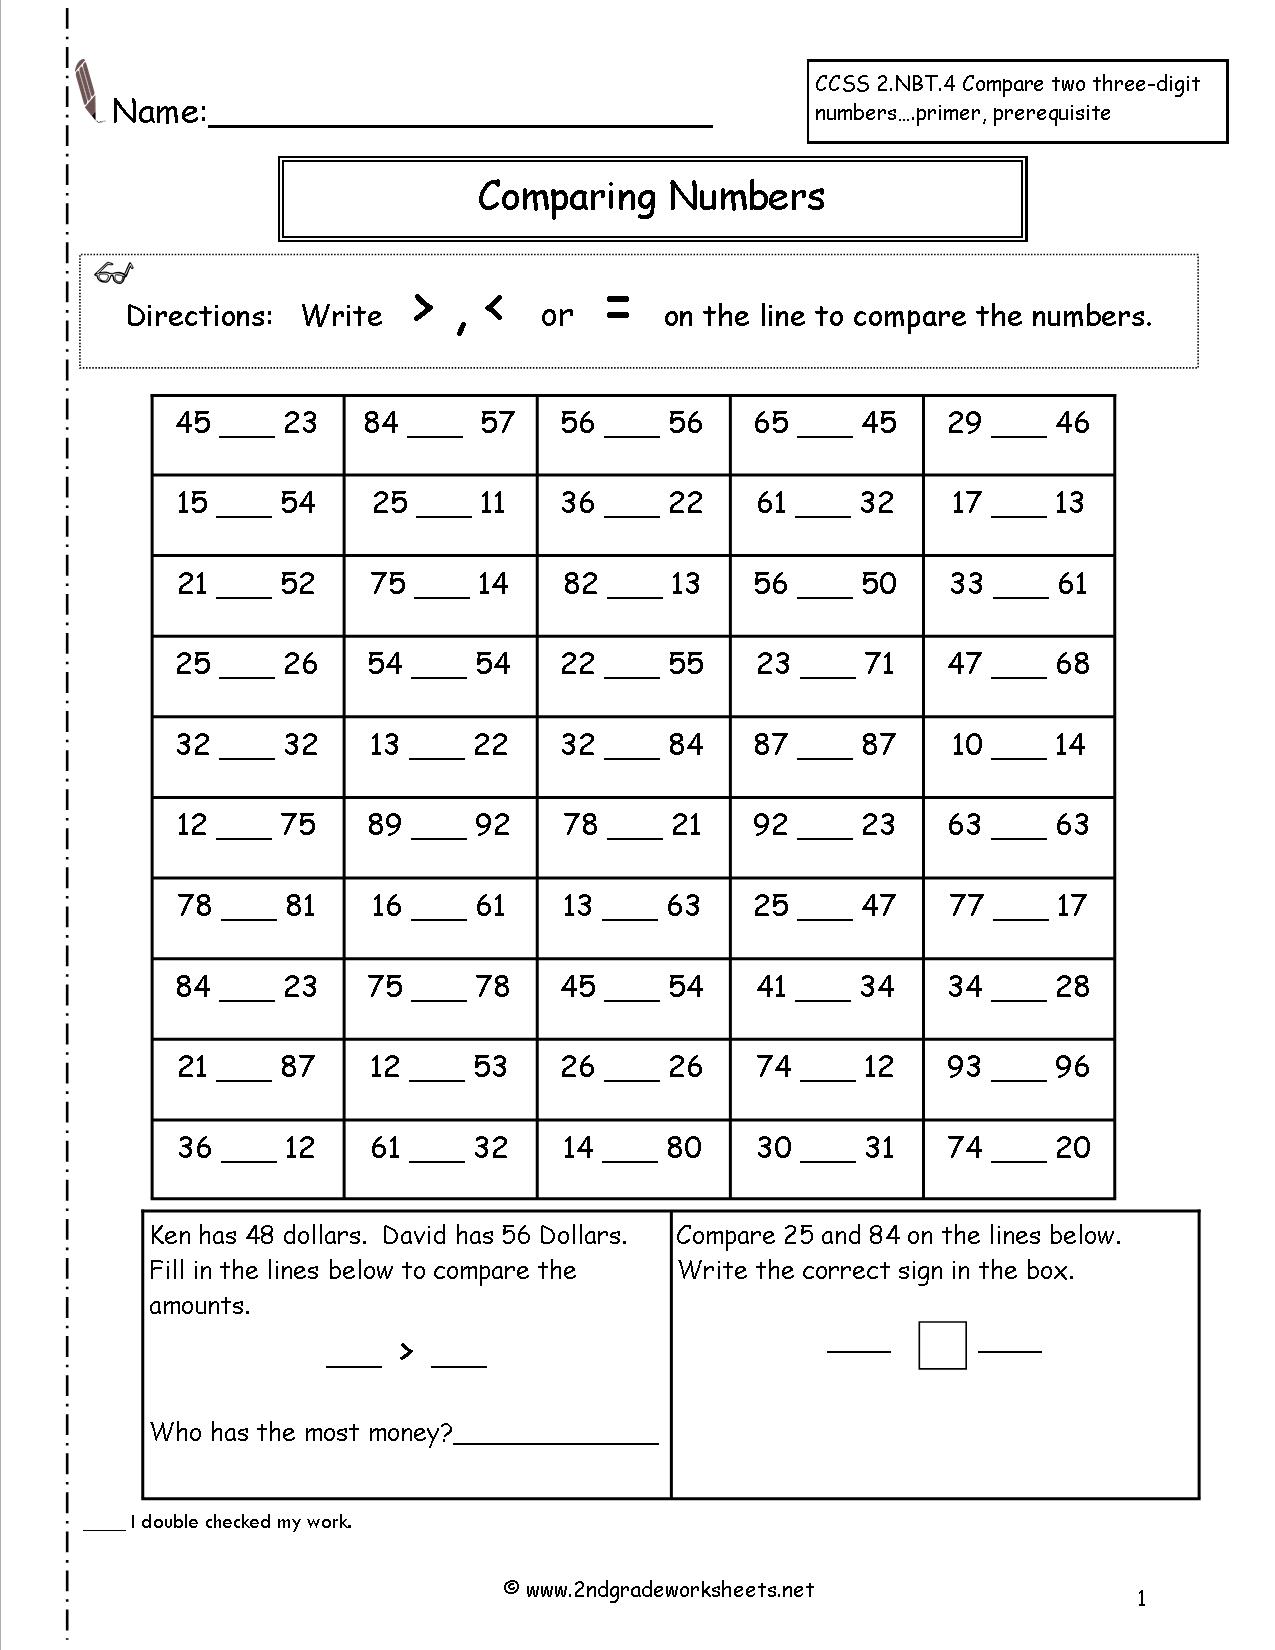 11-best-images-of-2nd-grade-comparing-numbers-worksheets-comparing-numbers-worksheet-greater